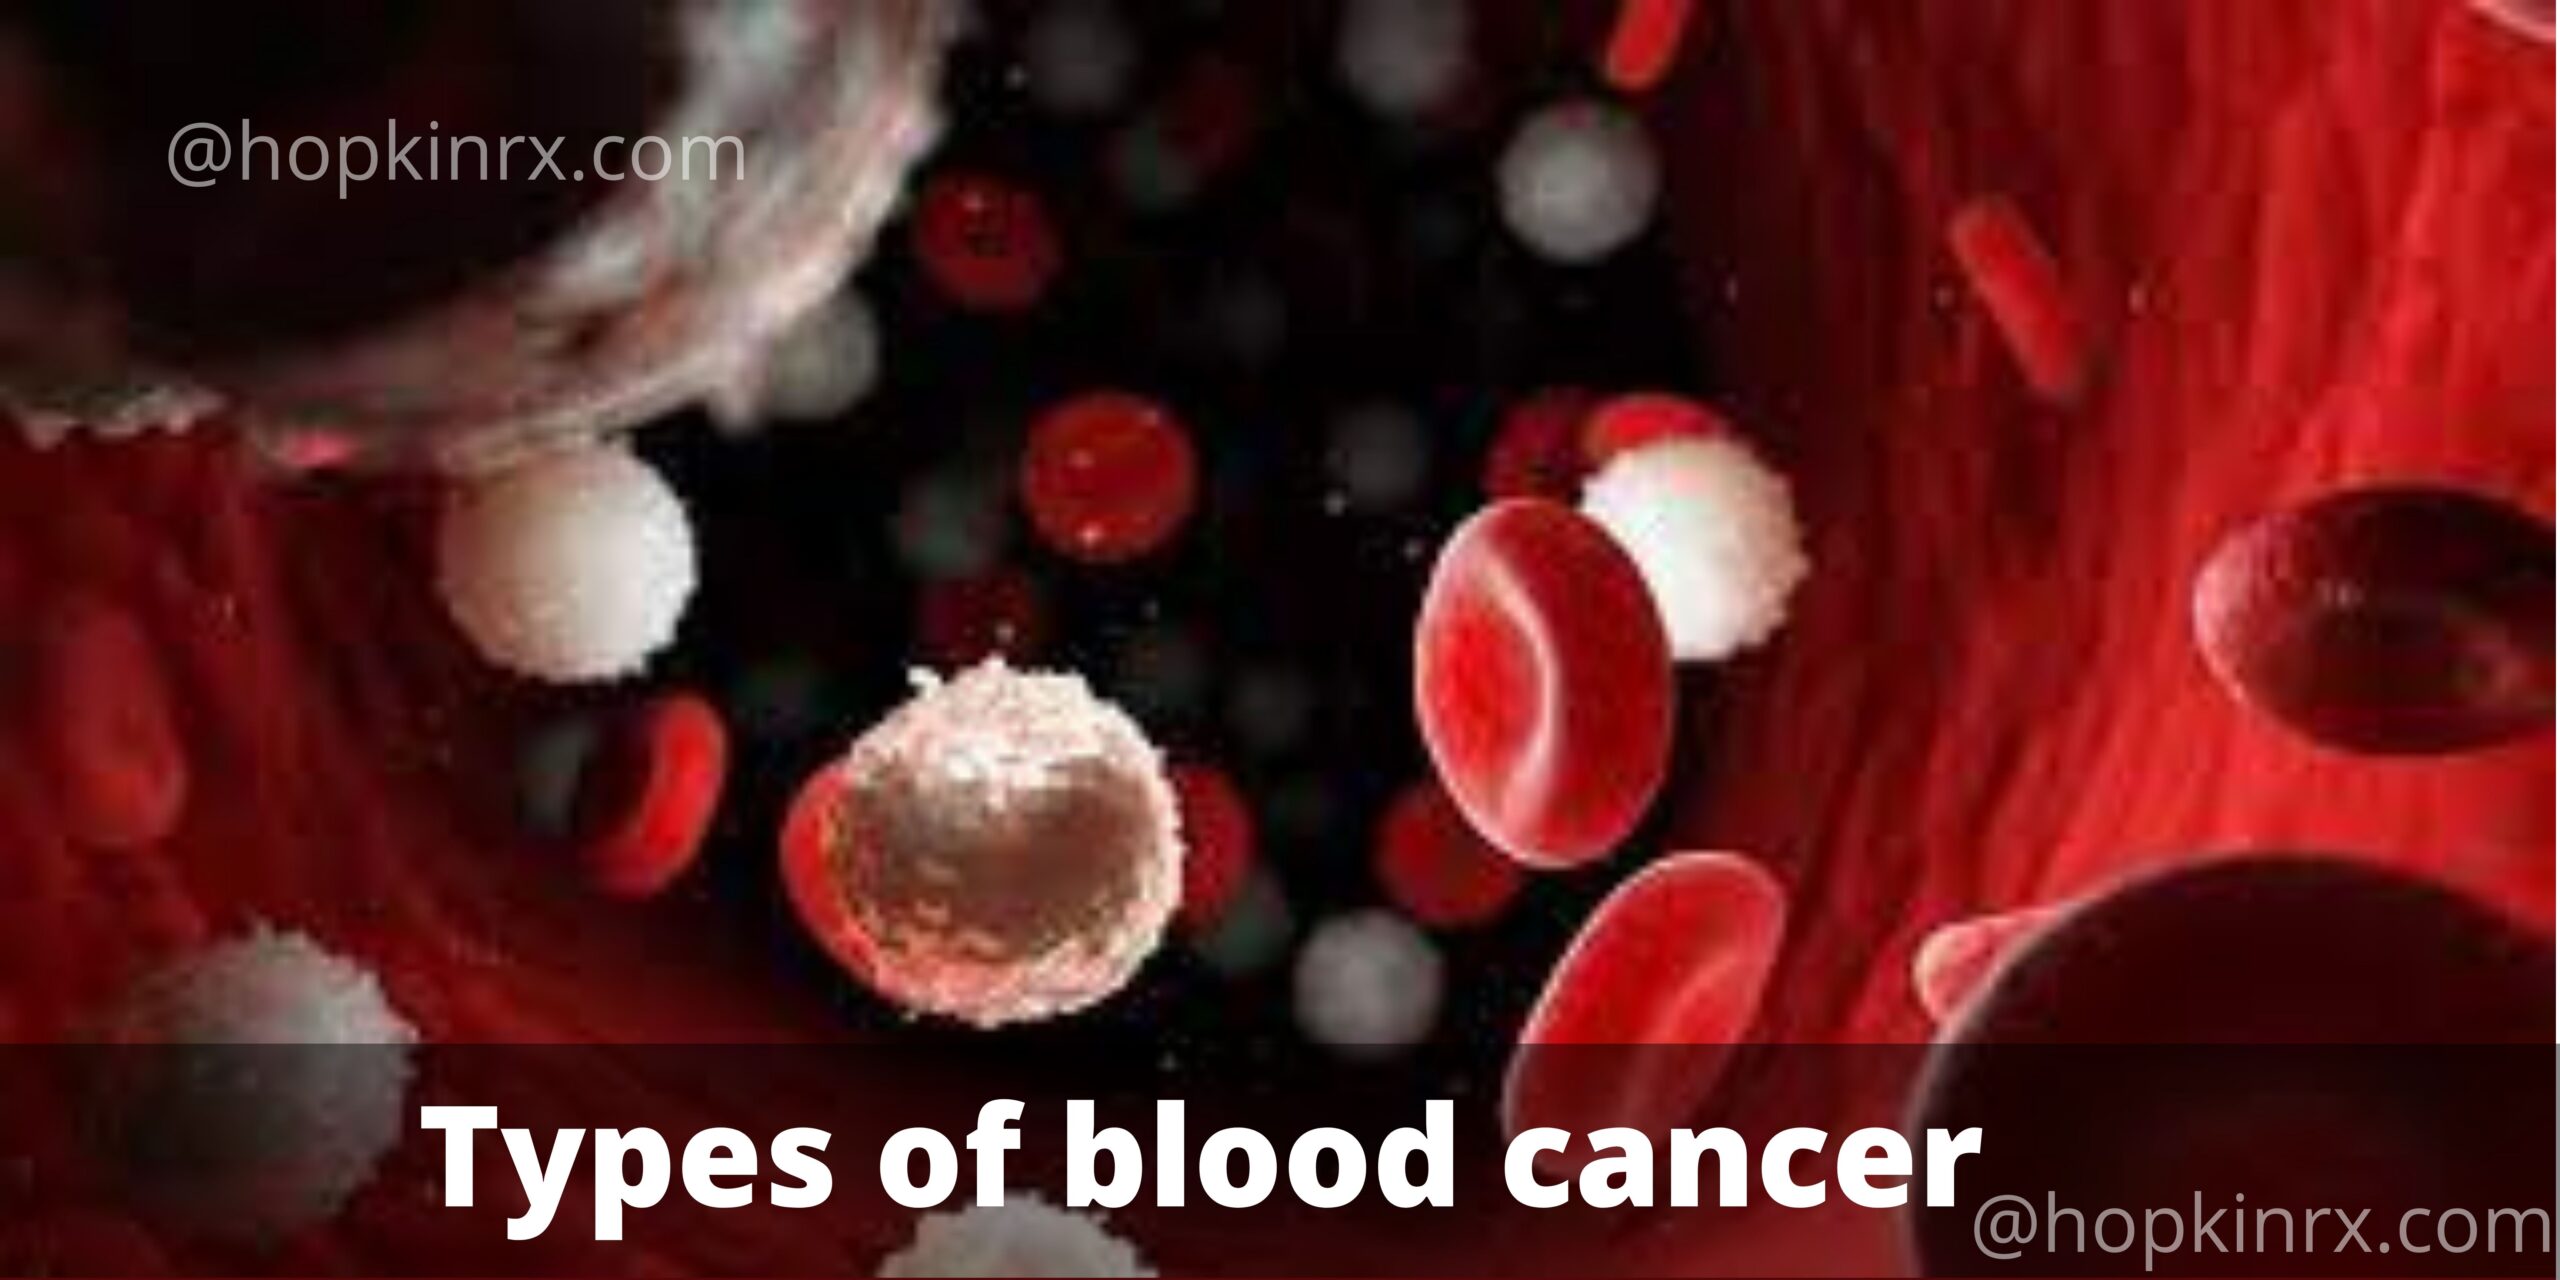 Types of blood cancer scaled